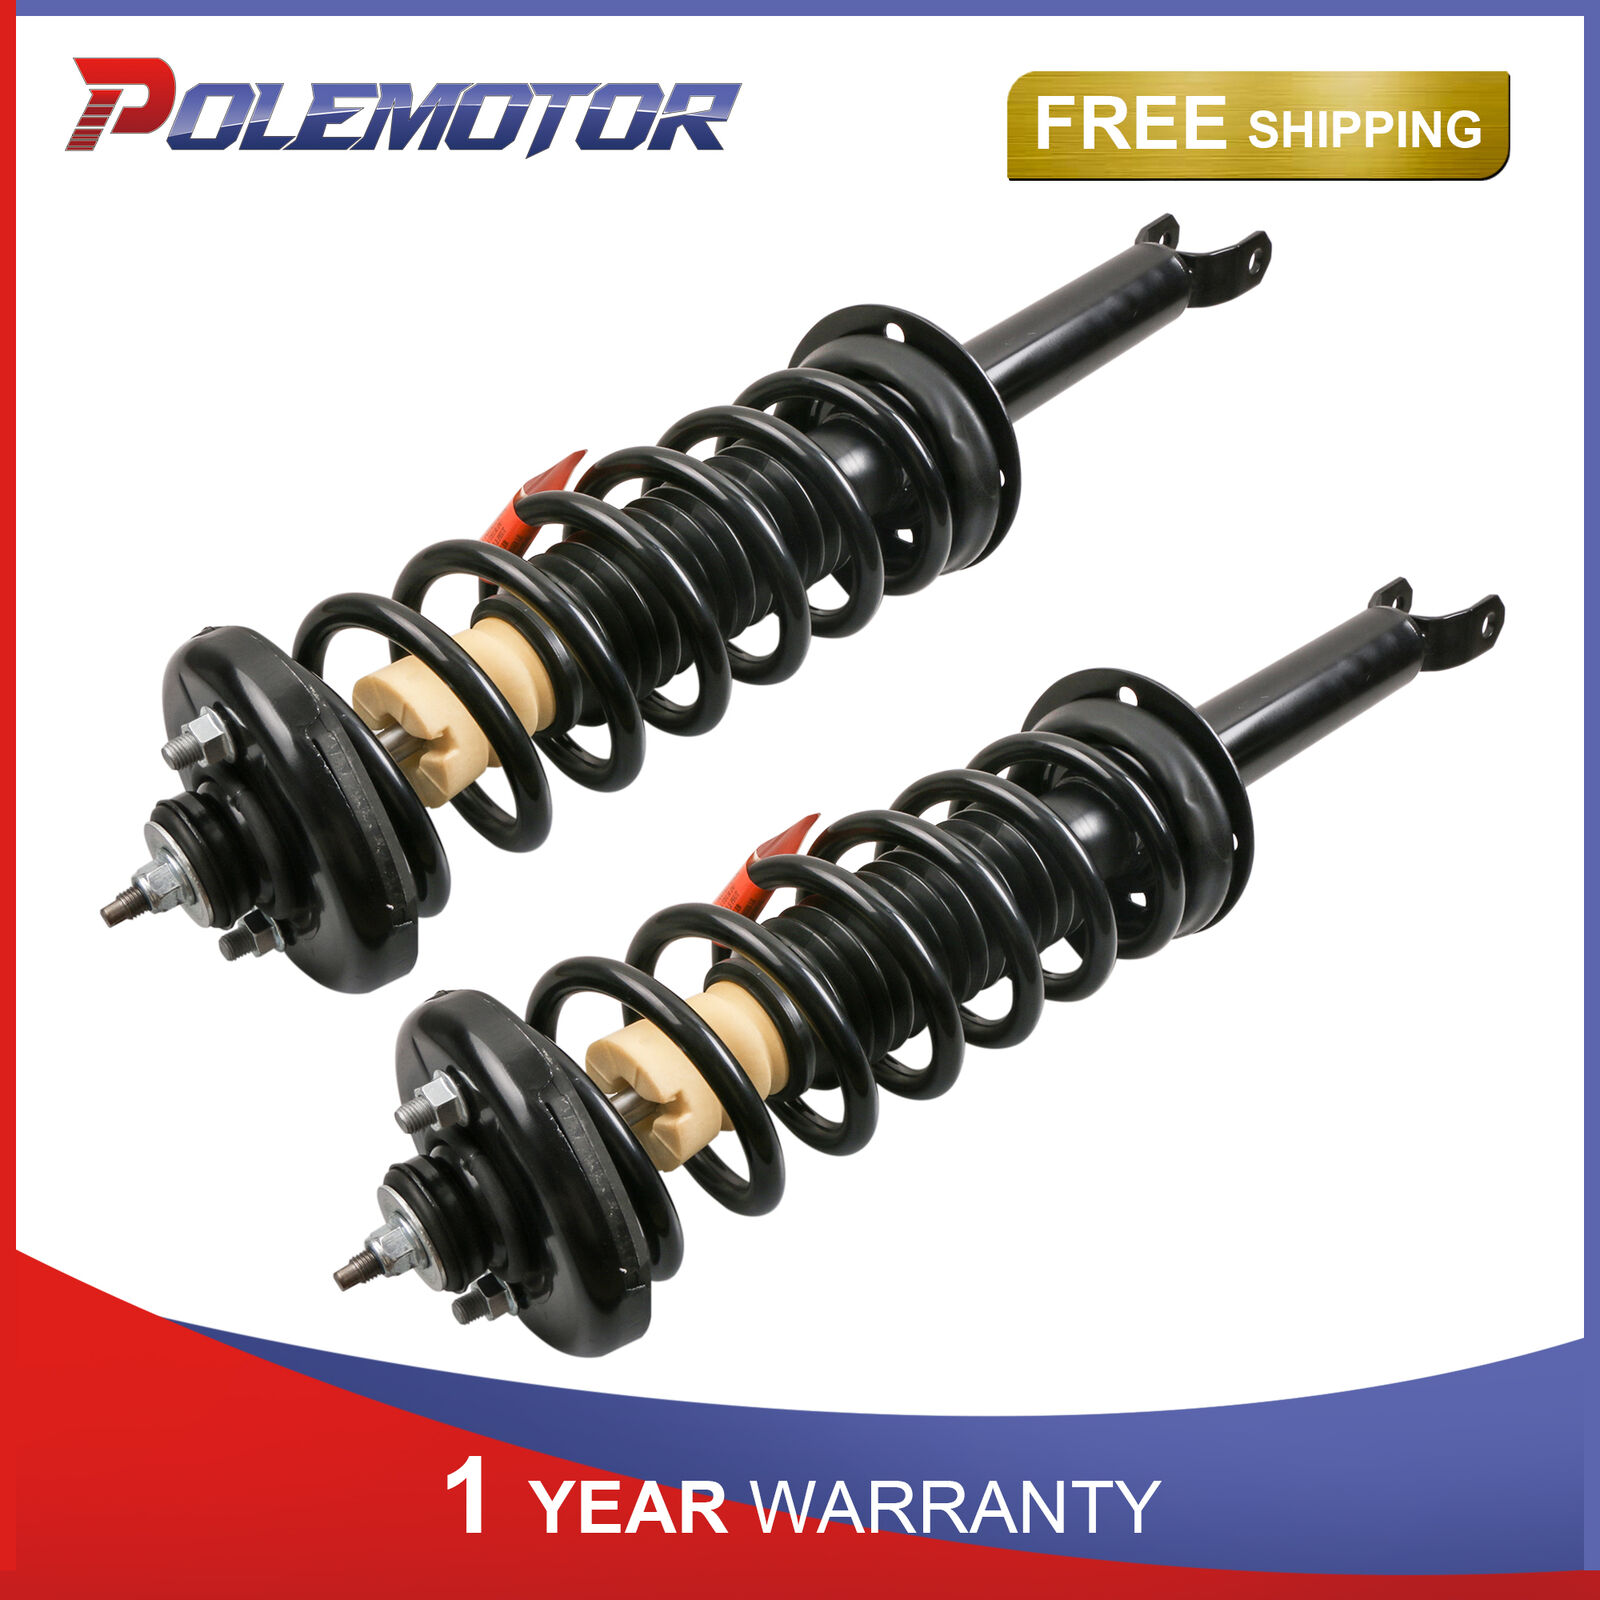 2x Rear Shocks Complete Strut Assembly For Honda Accord 2008-2012 Right & Left